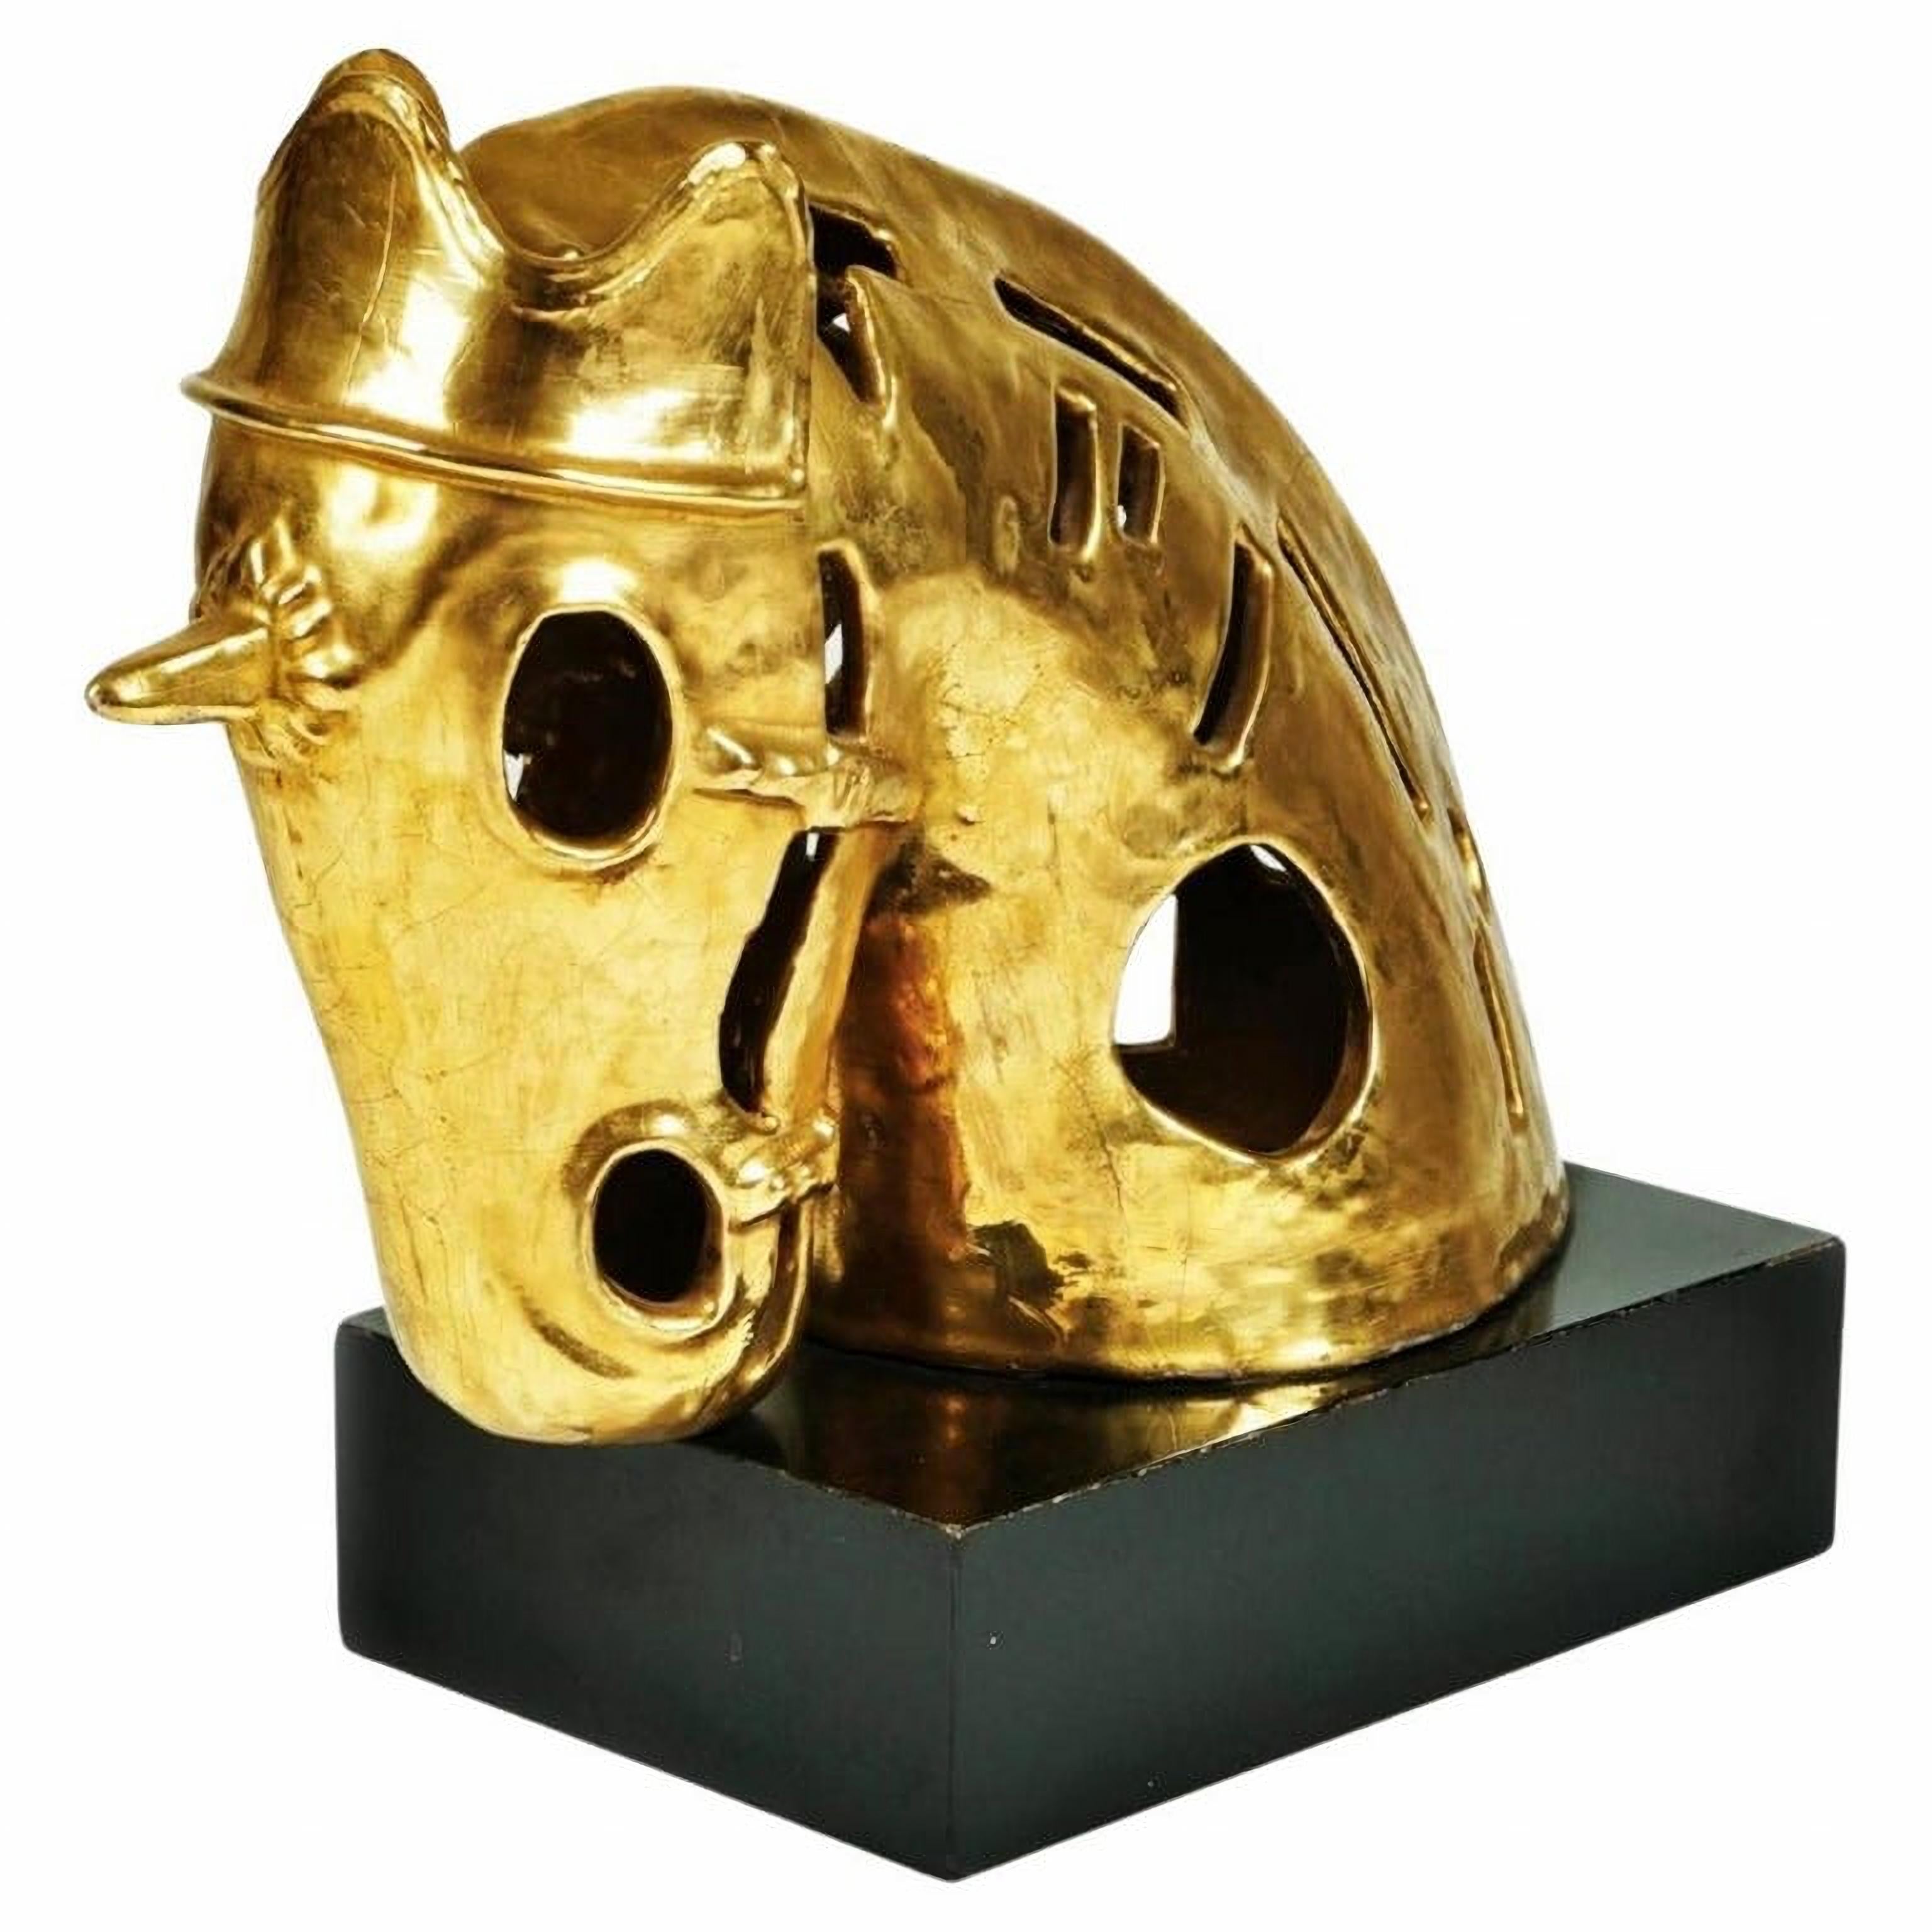 Italian Horse Head Sculpture in Golden Ceramic Early 20th Century For Sale 1